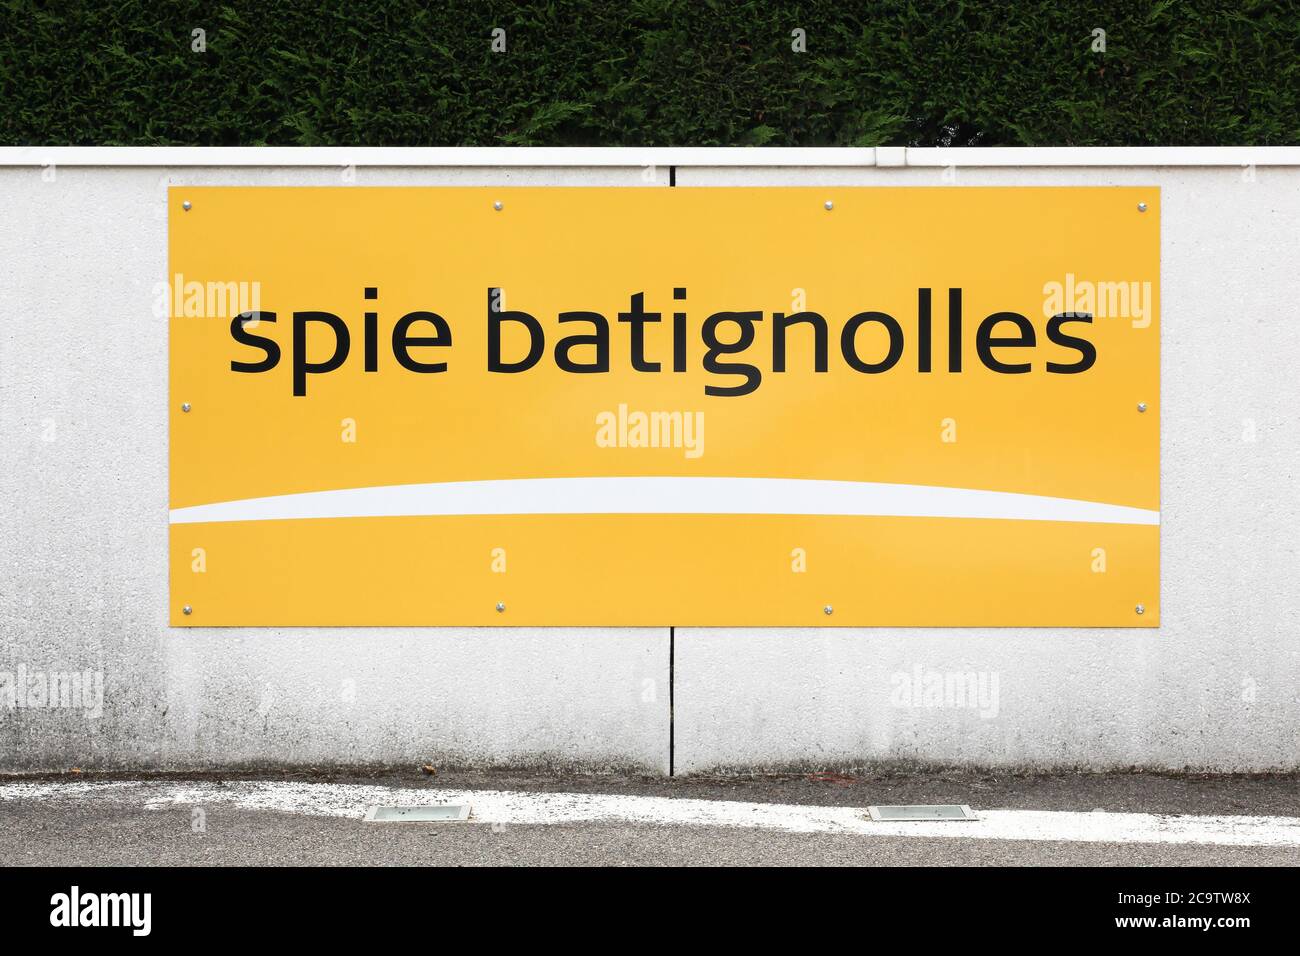 Dardilly, France - June 28, 2020: Spie Batignolles logo on a wall. Spie Batignolles is a French construction company based in Neuilly-sur-Seine Stock Photo